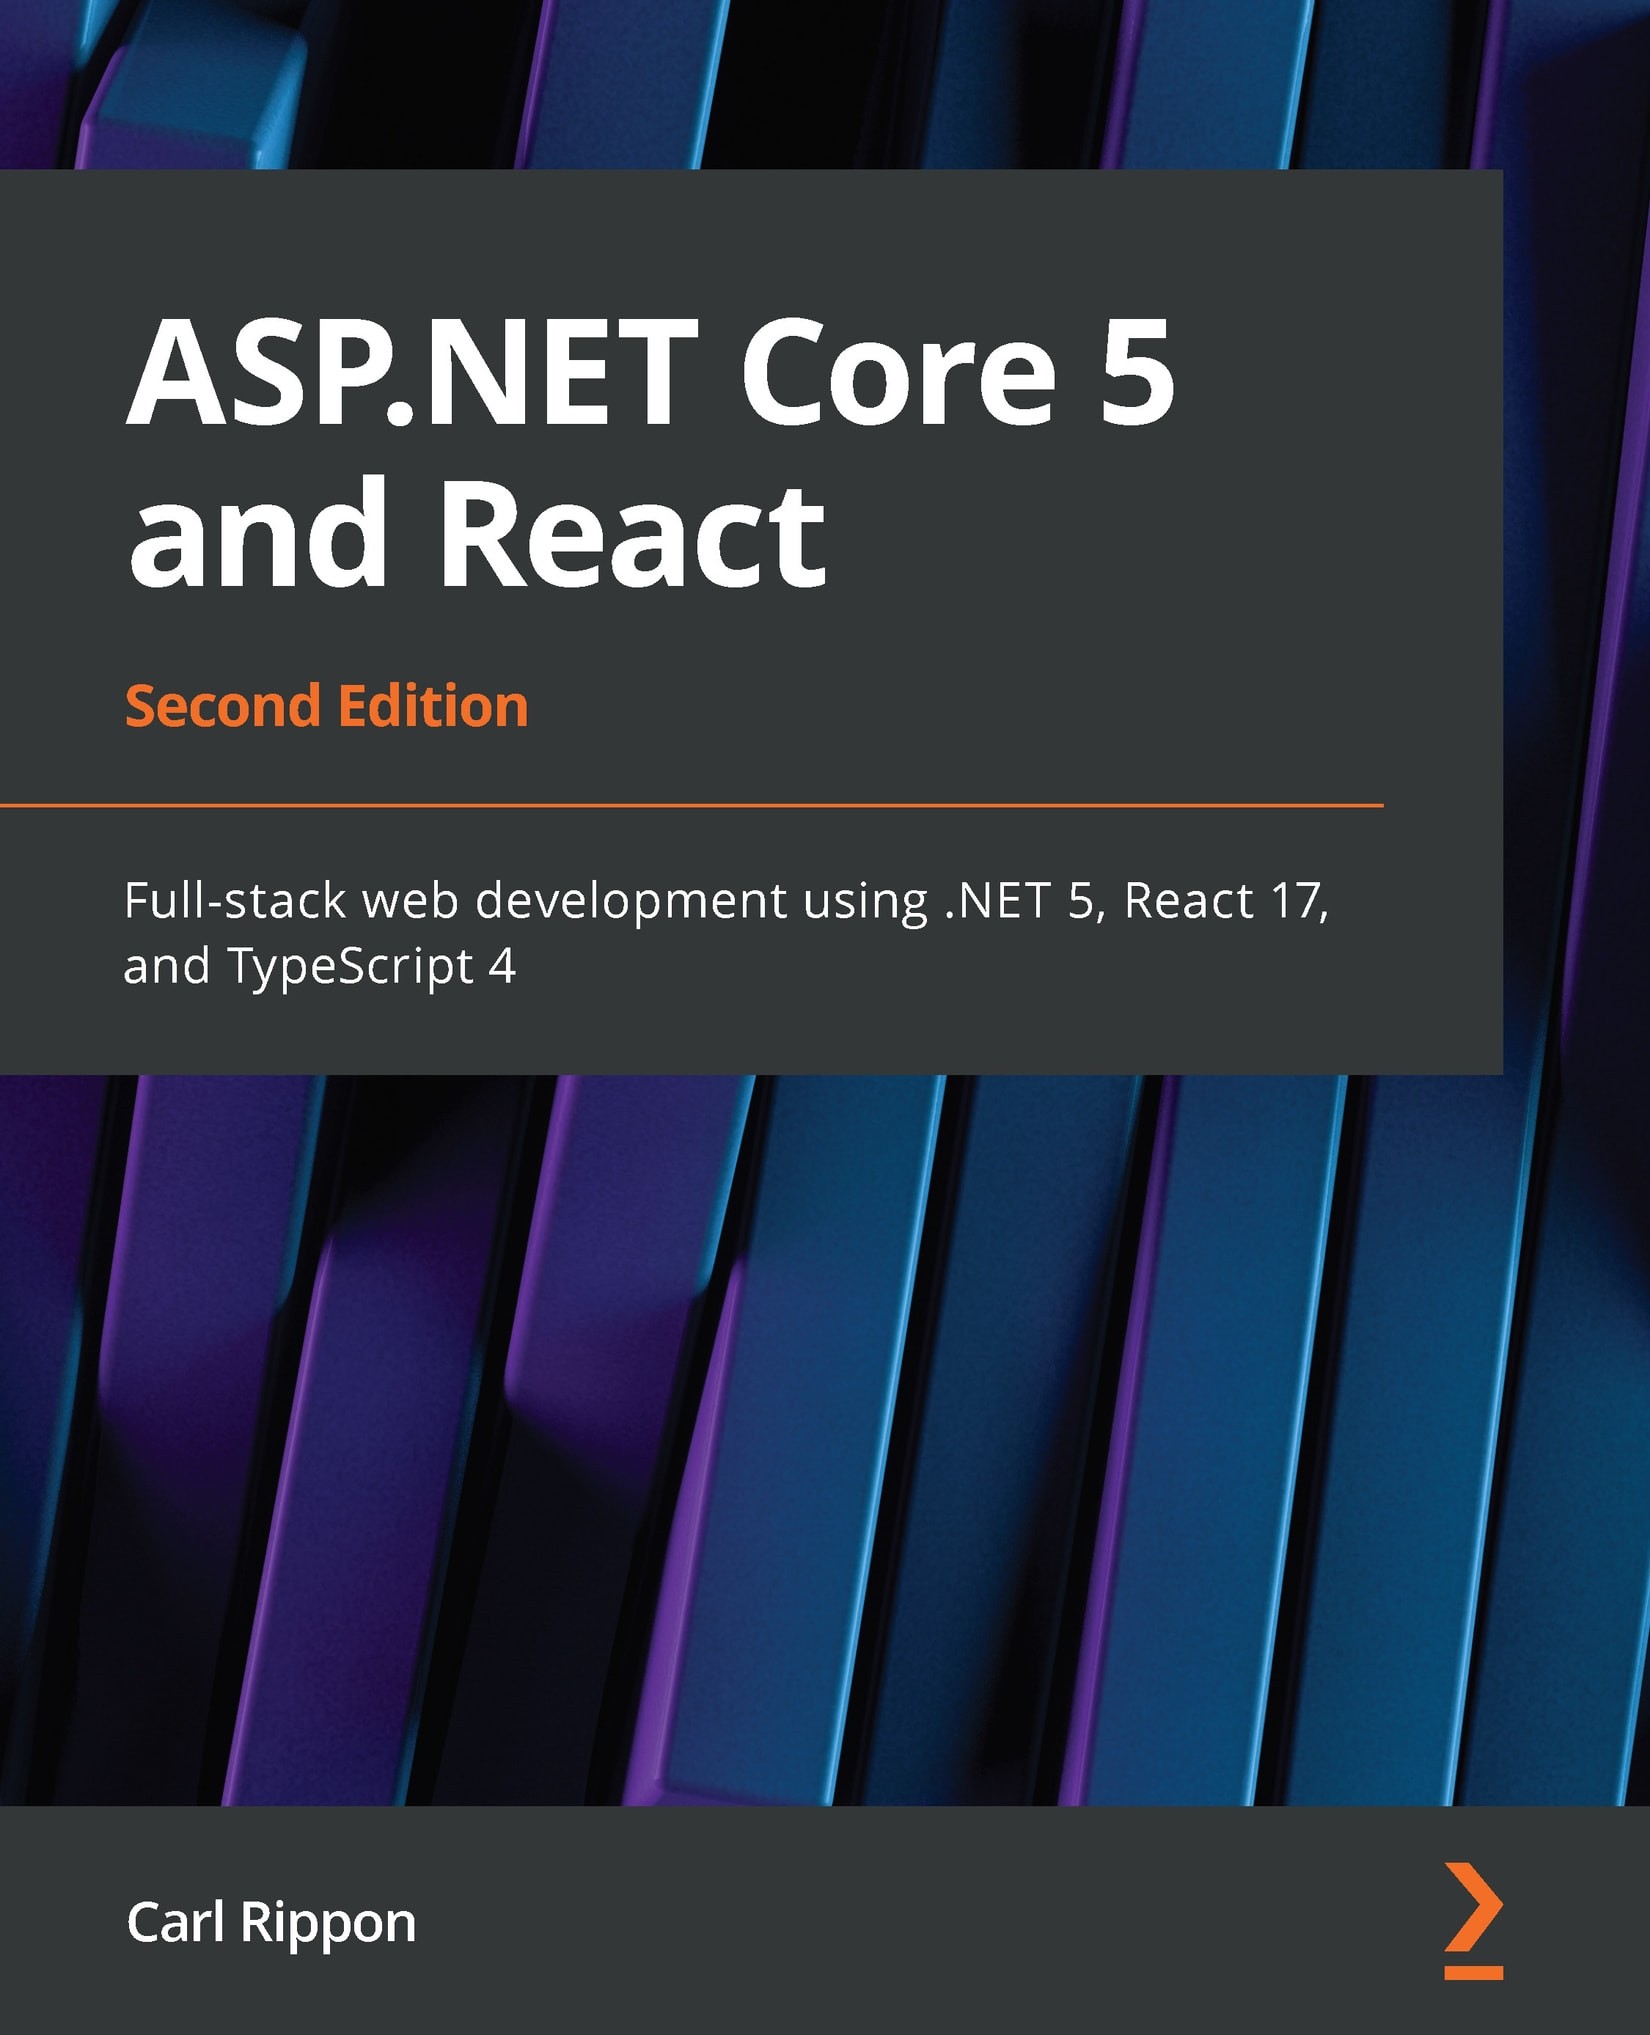 ASP.NET Core 5 and React - Second Edition: Full-Stack Web Development using .NET 5, React 17, and TypeScript 4